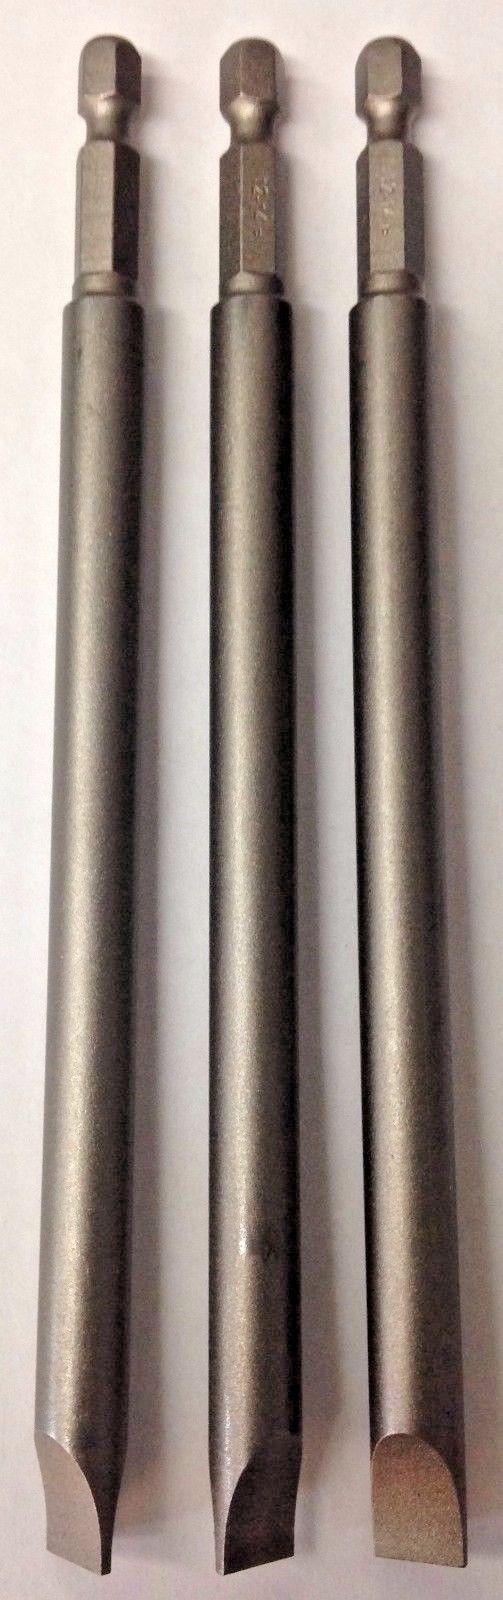 Bosch 2610001122 Slotted Power Screw Bits 12-14 x 6" Long 3 Pieces